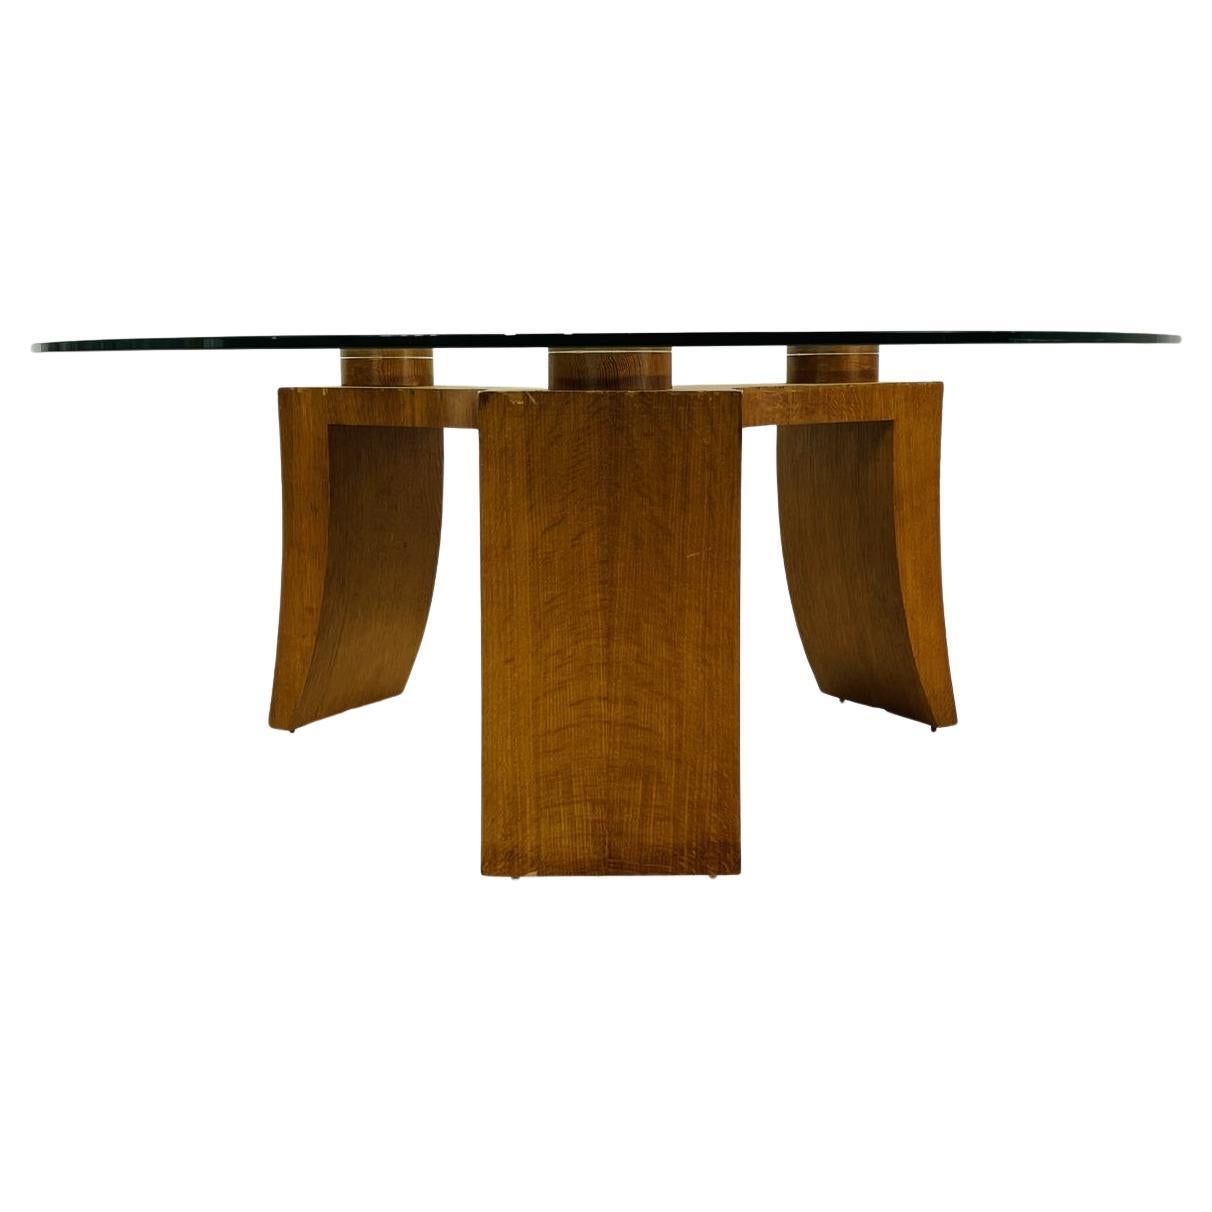 Wood & Glass Coffee Table in the style of Vladimir Kagan